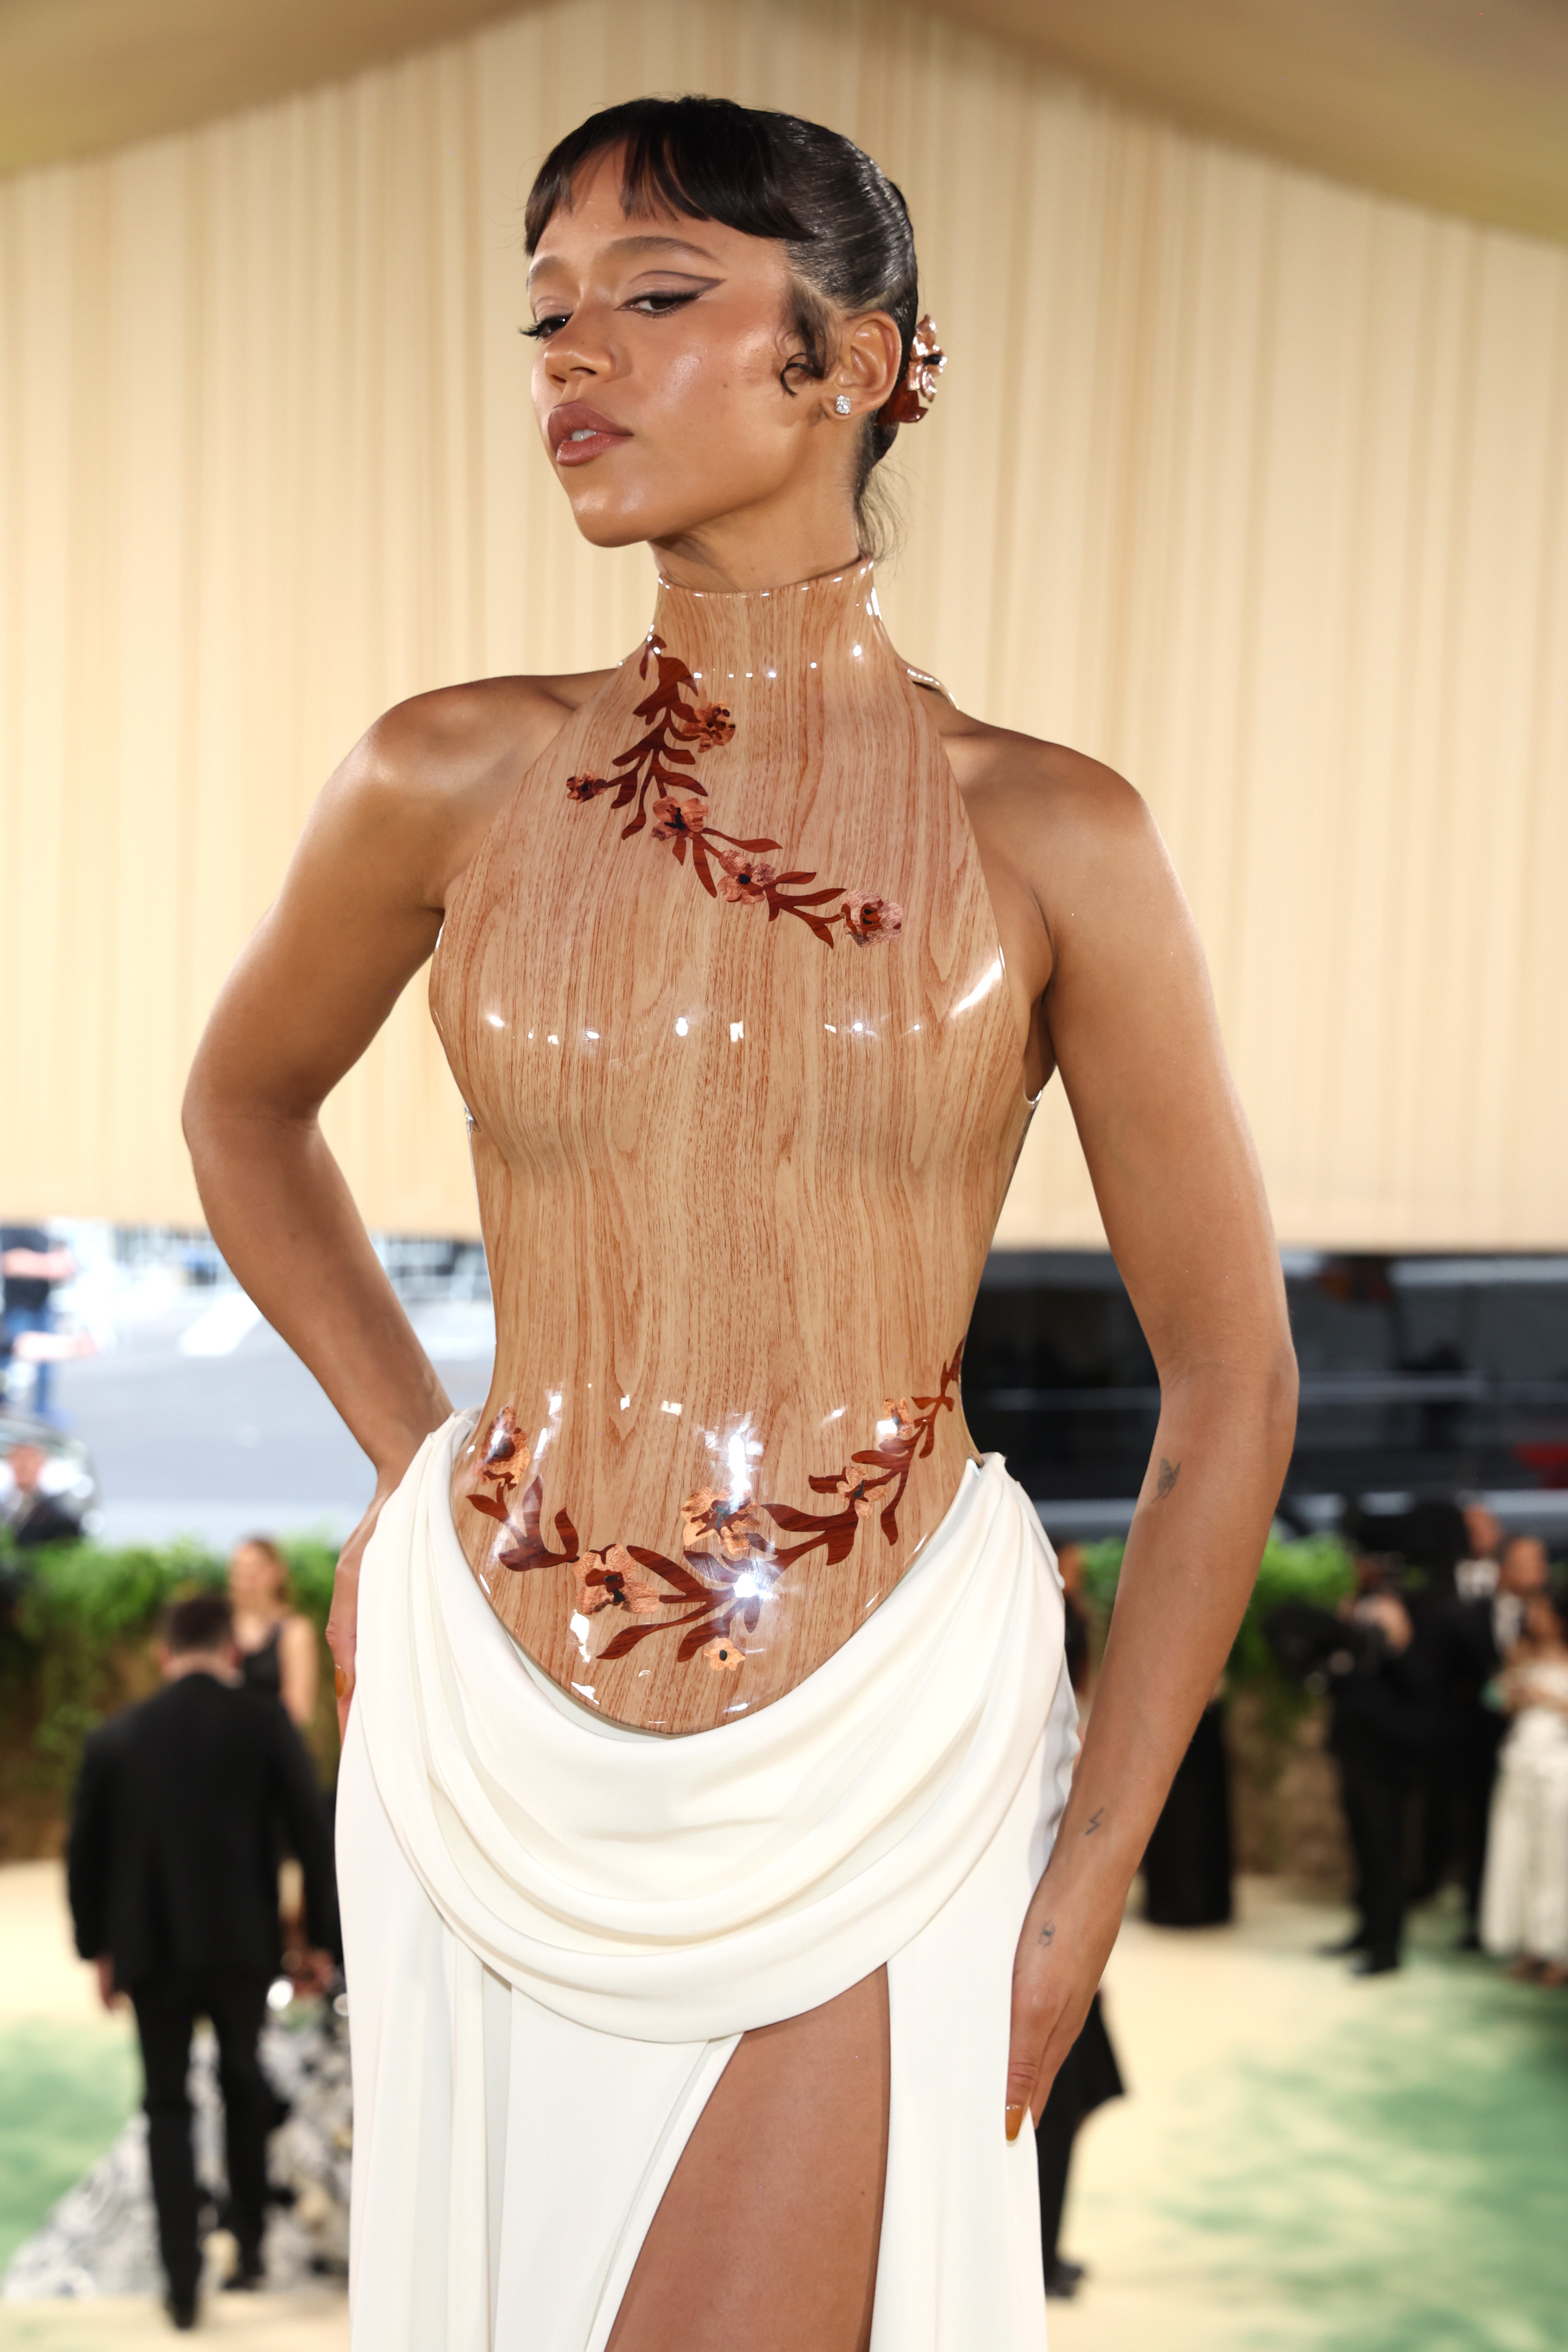 Taylor Russell in a dress with a wooden corset and white draped skirt